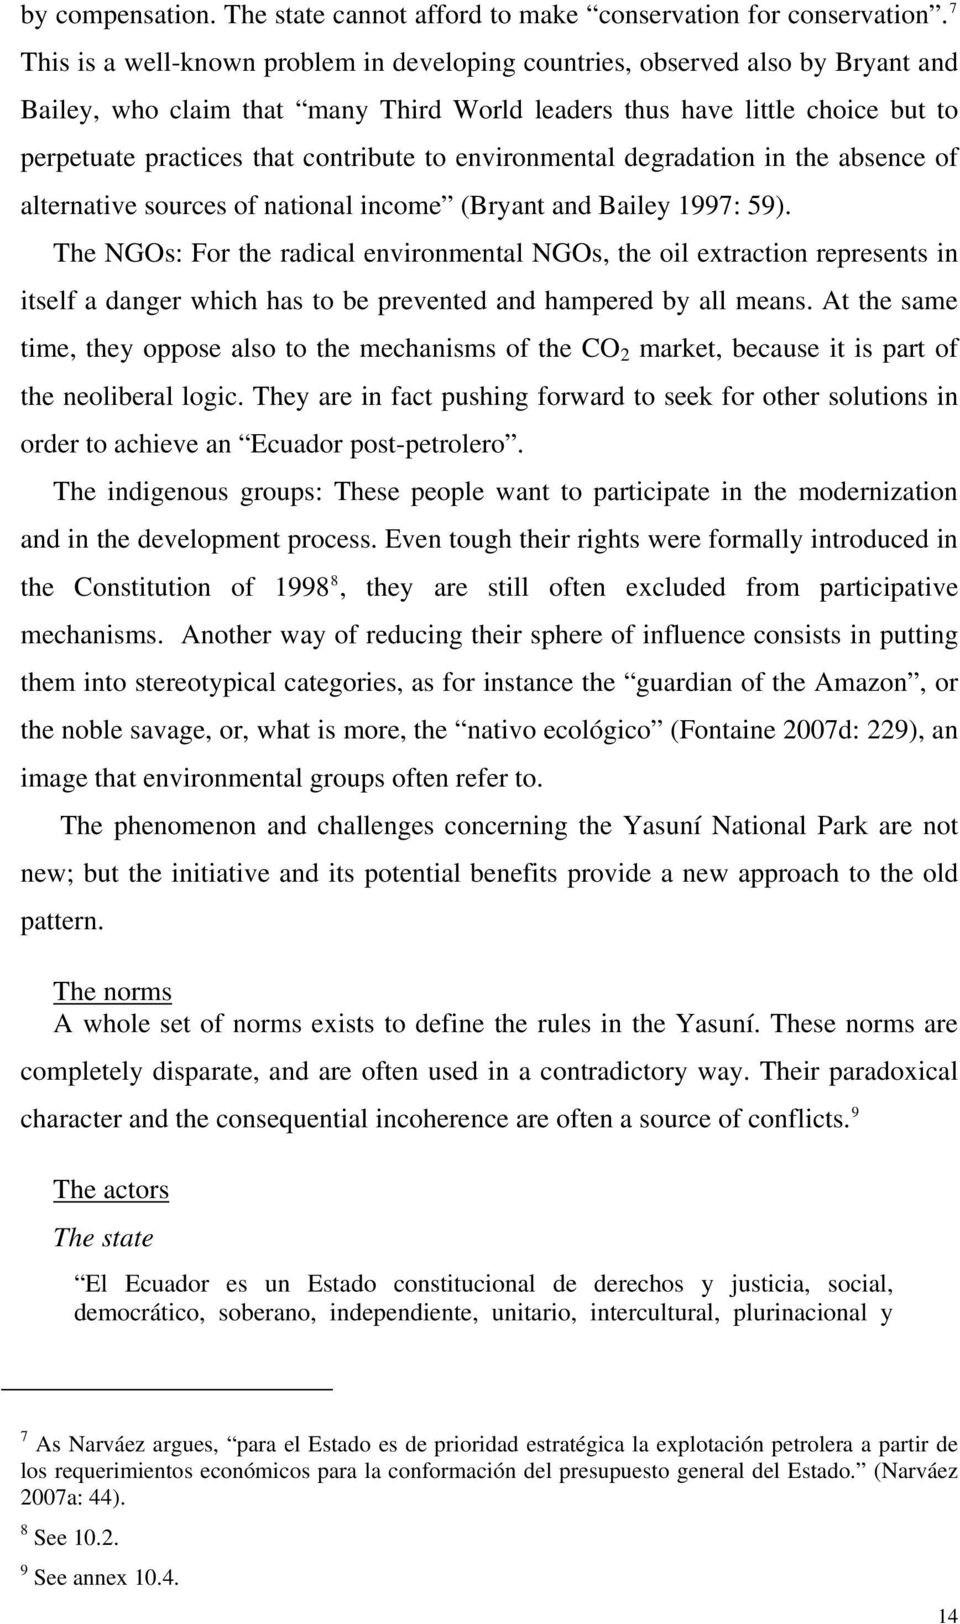 to environmental degradation in the absence of alternative sources of national income (Bryant and Bailey 1997: 59).